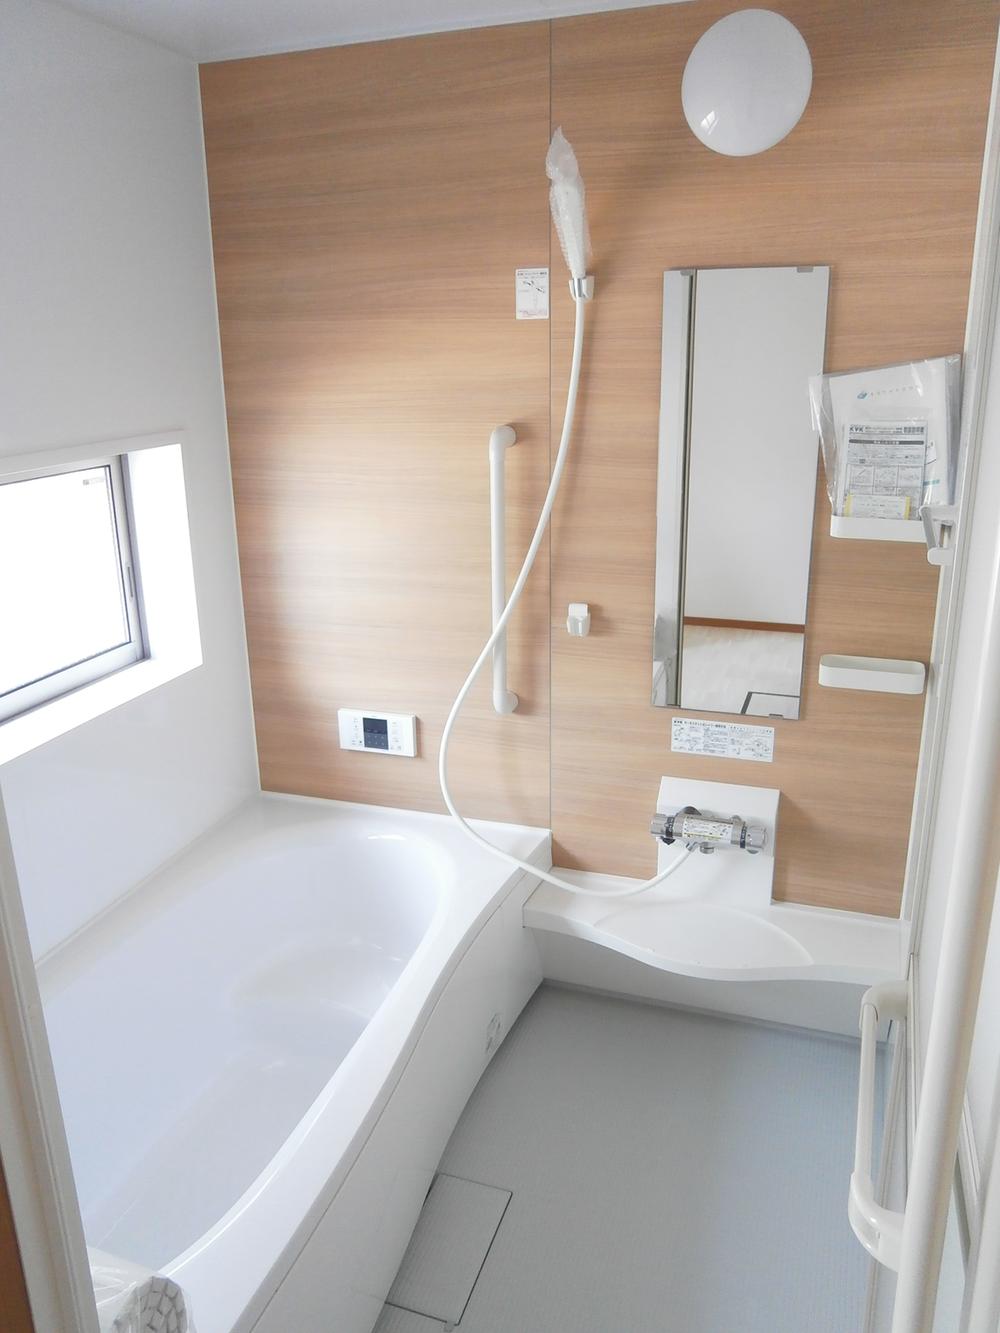 Same specifications photo (bathroom). Same specification bathroom Cleaning if there is a window is also useful.